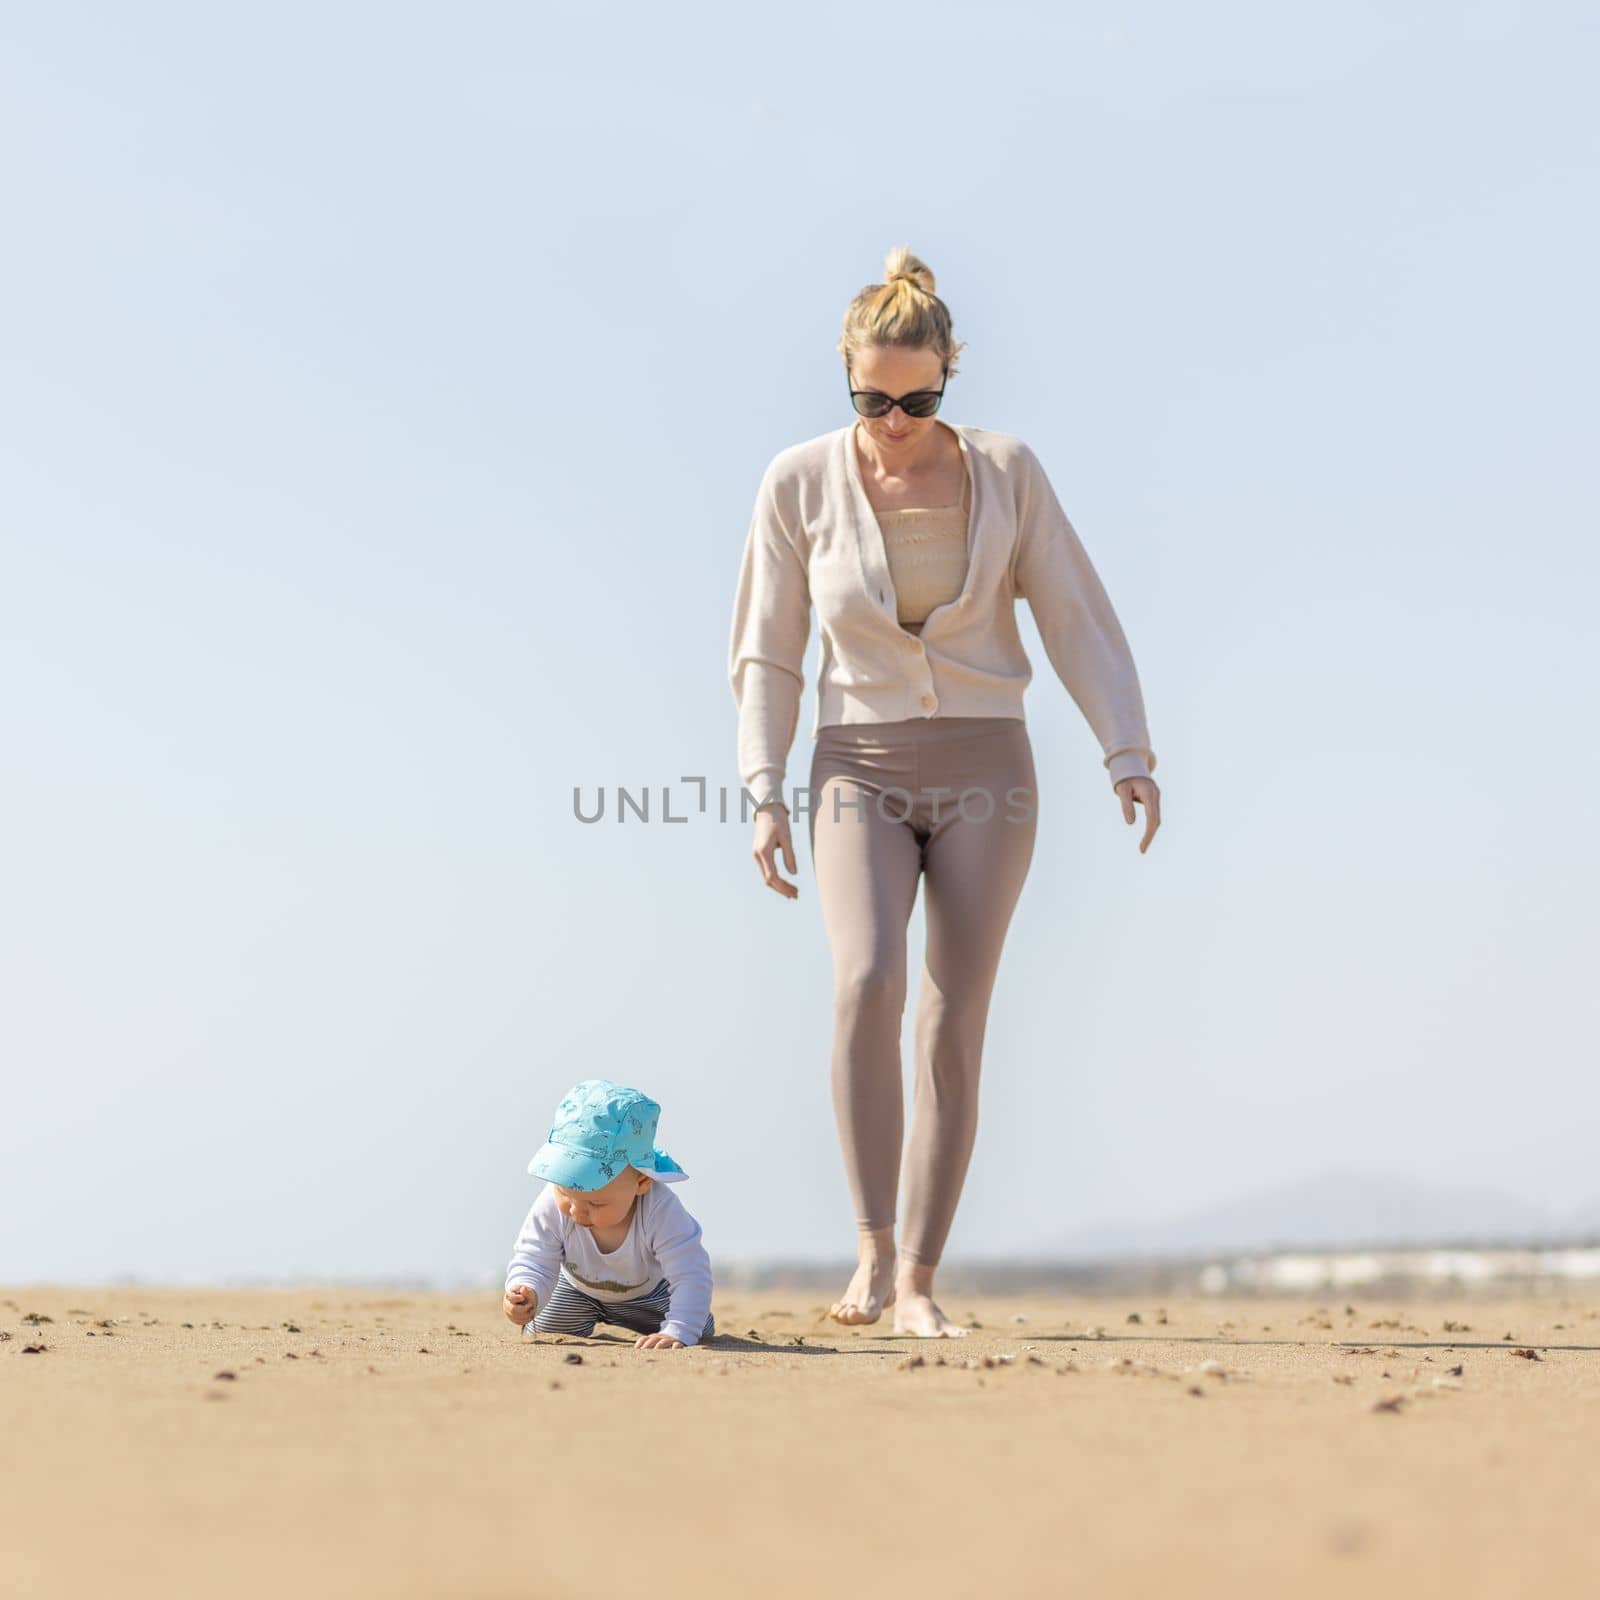 Mother playing his infant baby boy son on sandy beach enjoying summer vacationson on Lanzarote island, Spain. Family travel and vacations concept. by kasto